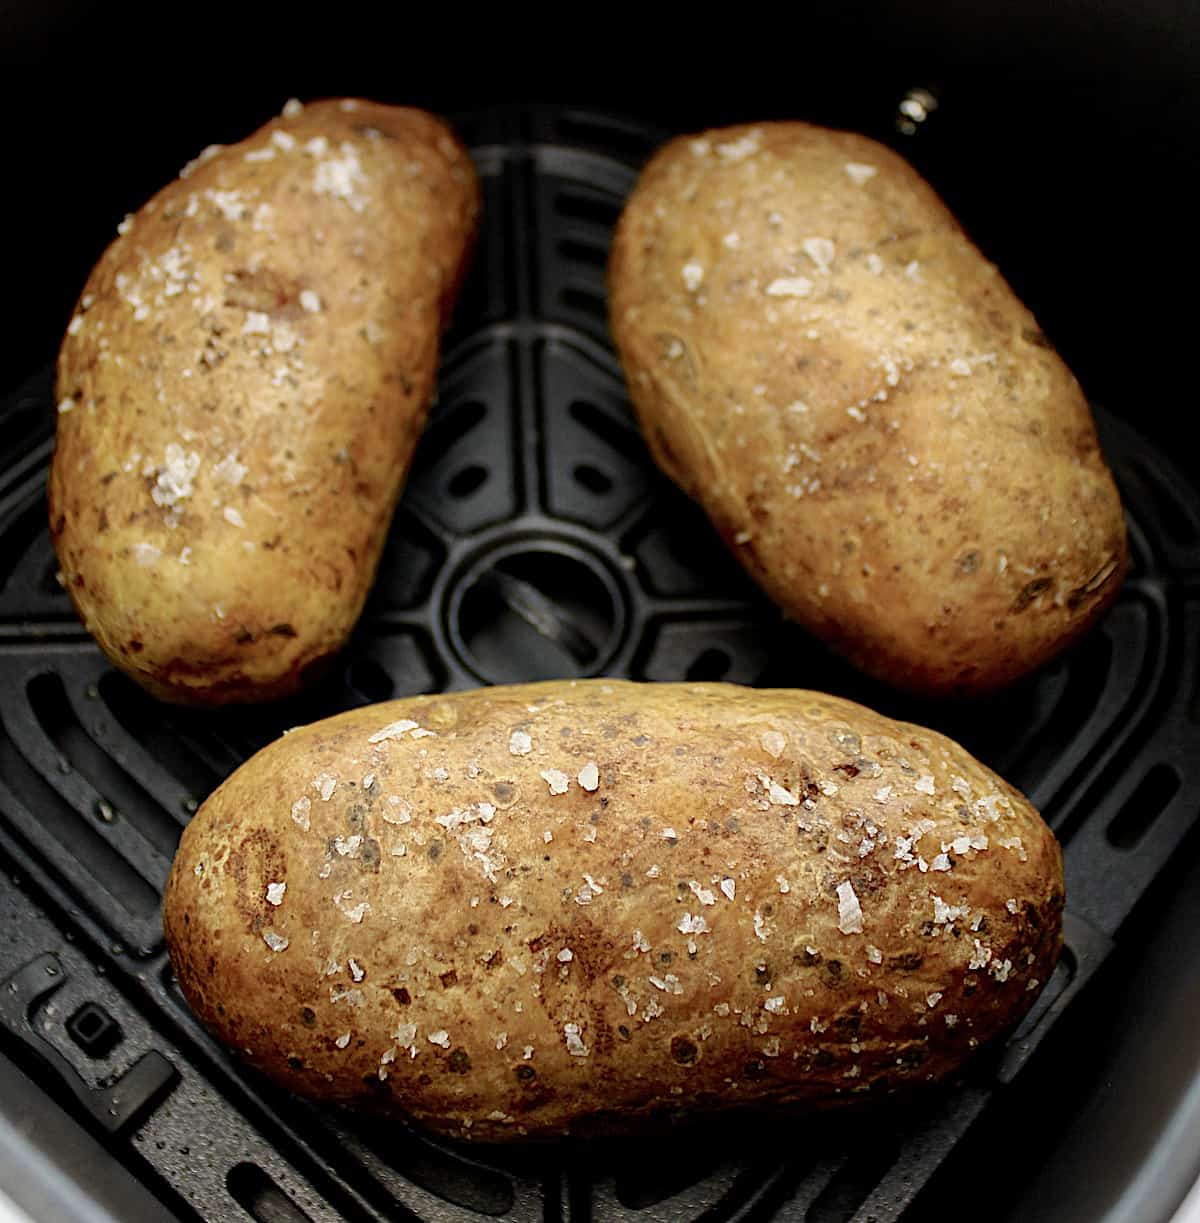 3 baked potatoes with salt on the outsides in air fryer basket